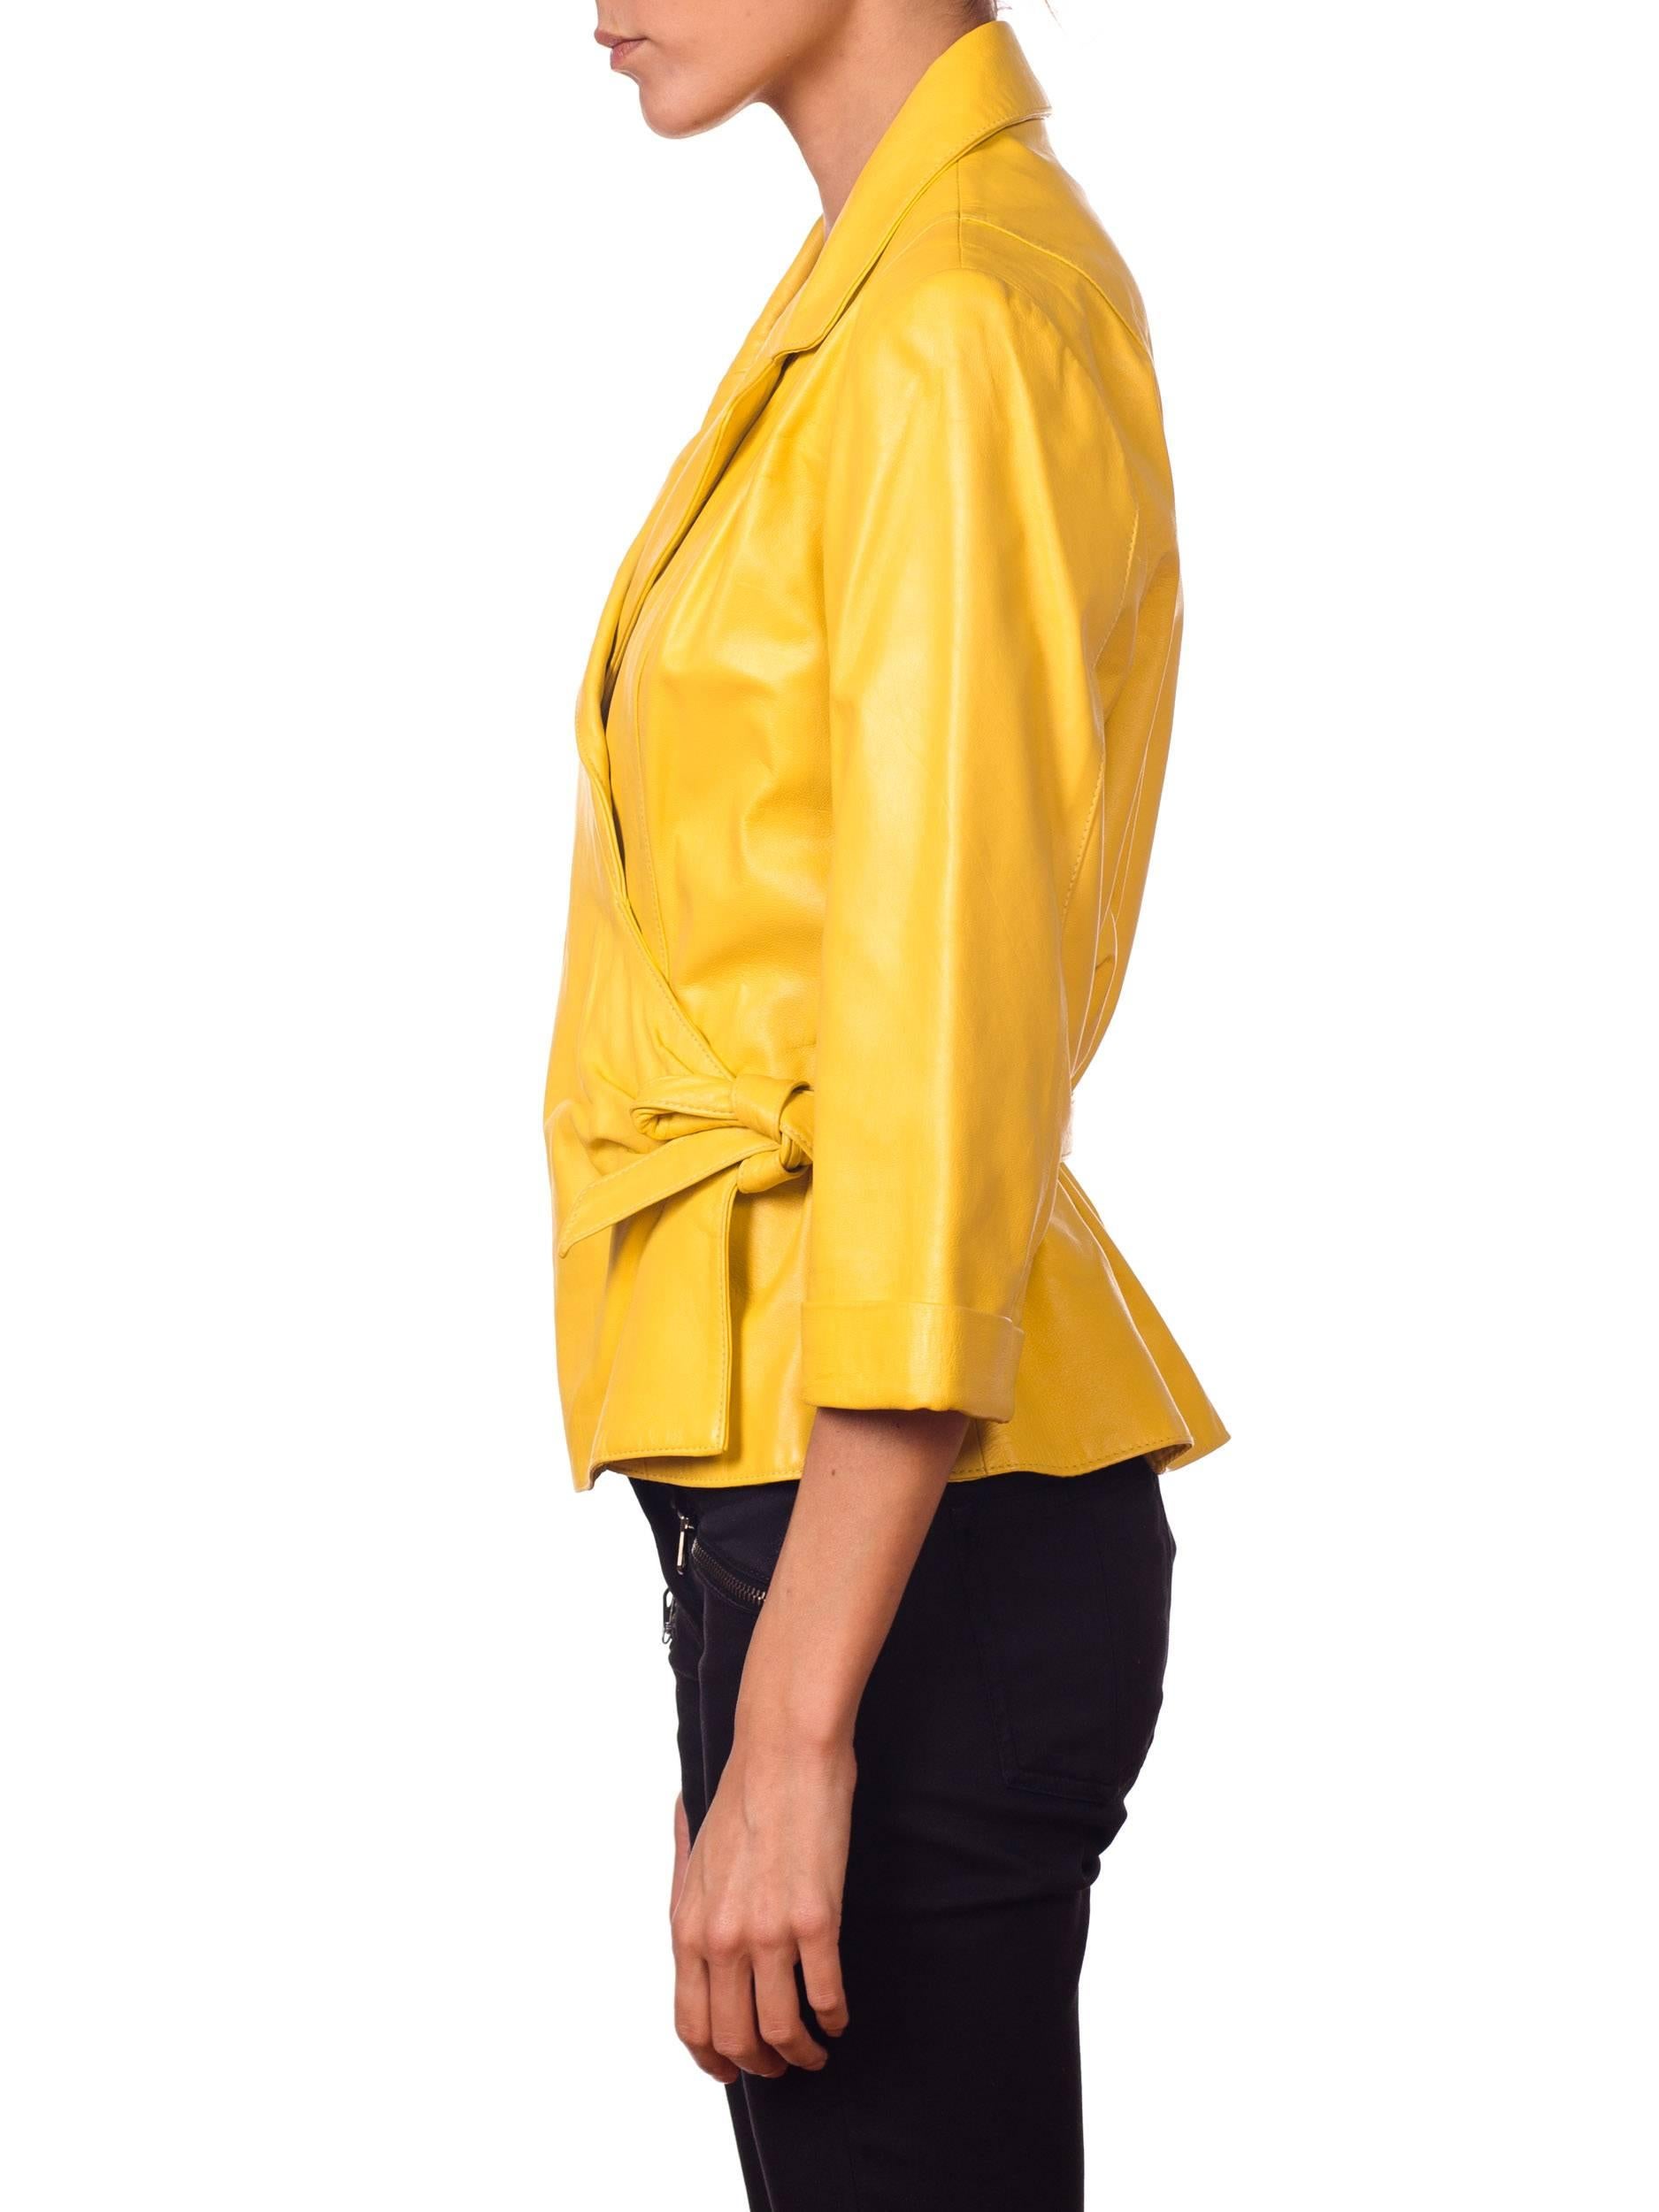 Women's 1980s Yellow Leather Wrap Front Shirt Jacket 